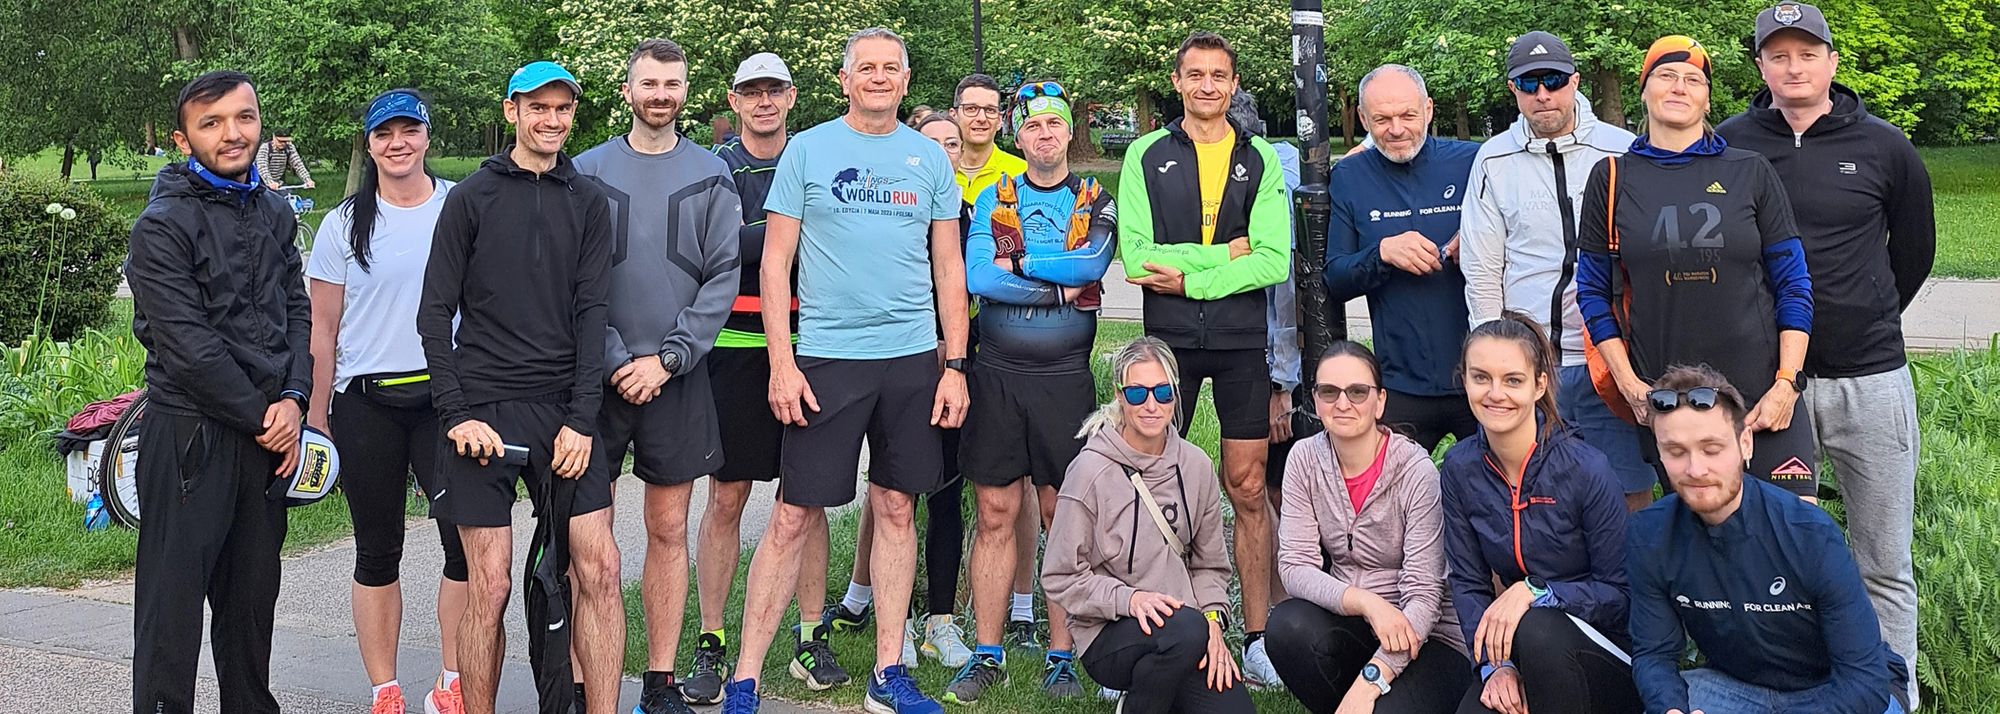 As part of the Running for Clean Air project, World Athletics deployed an air quality sensor in Warsaw in April to measure the air quality and related weather factors that impact those exercising in the area.